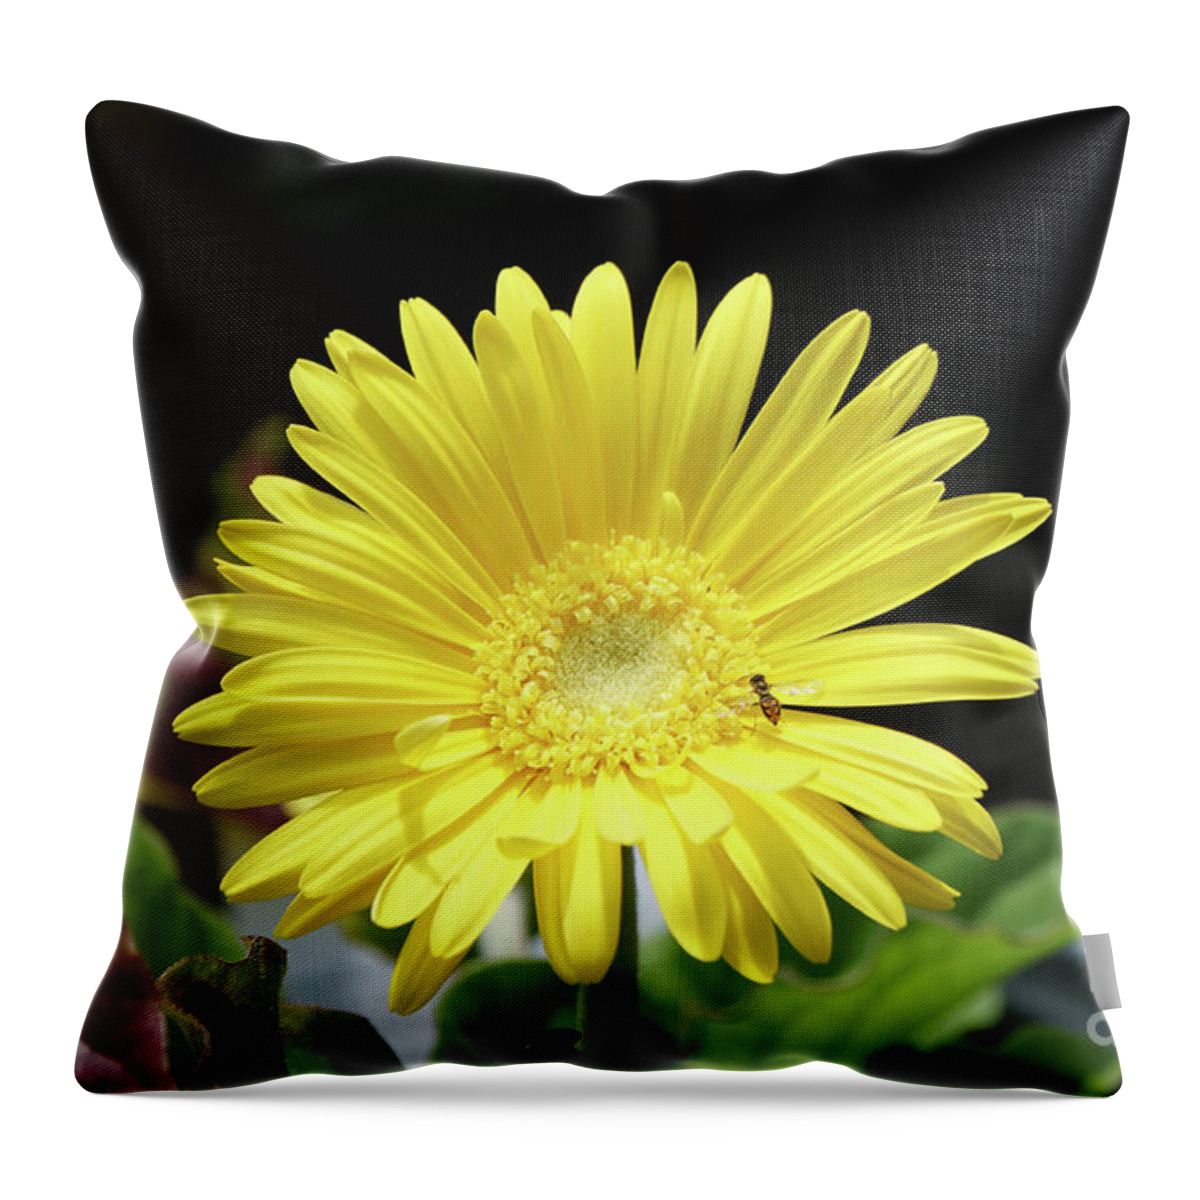 Daisy Throw Pillow featuring the photograph Daisy and Pollinator by Robert E Alter Reflections of Infinity